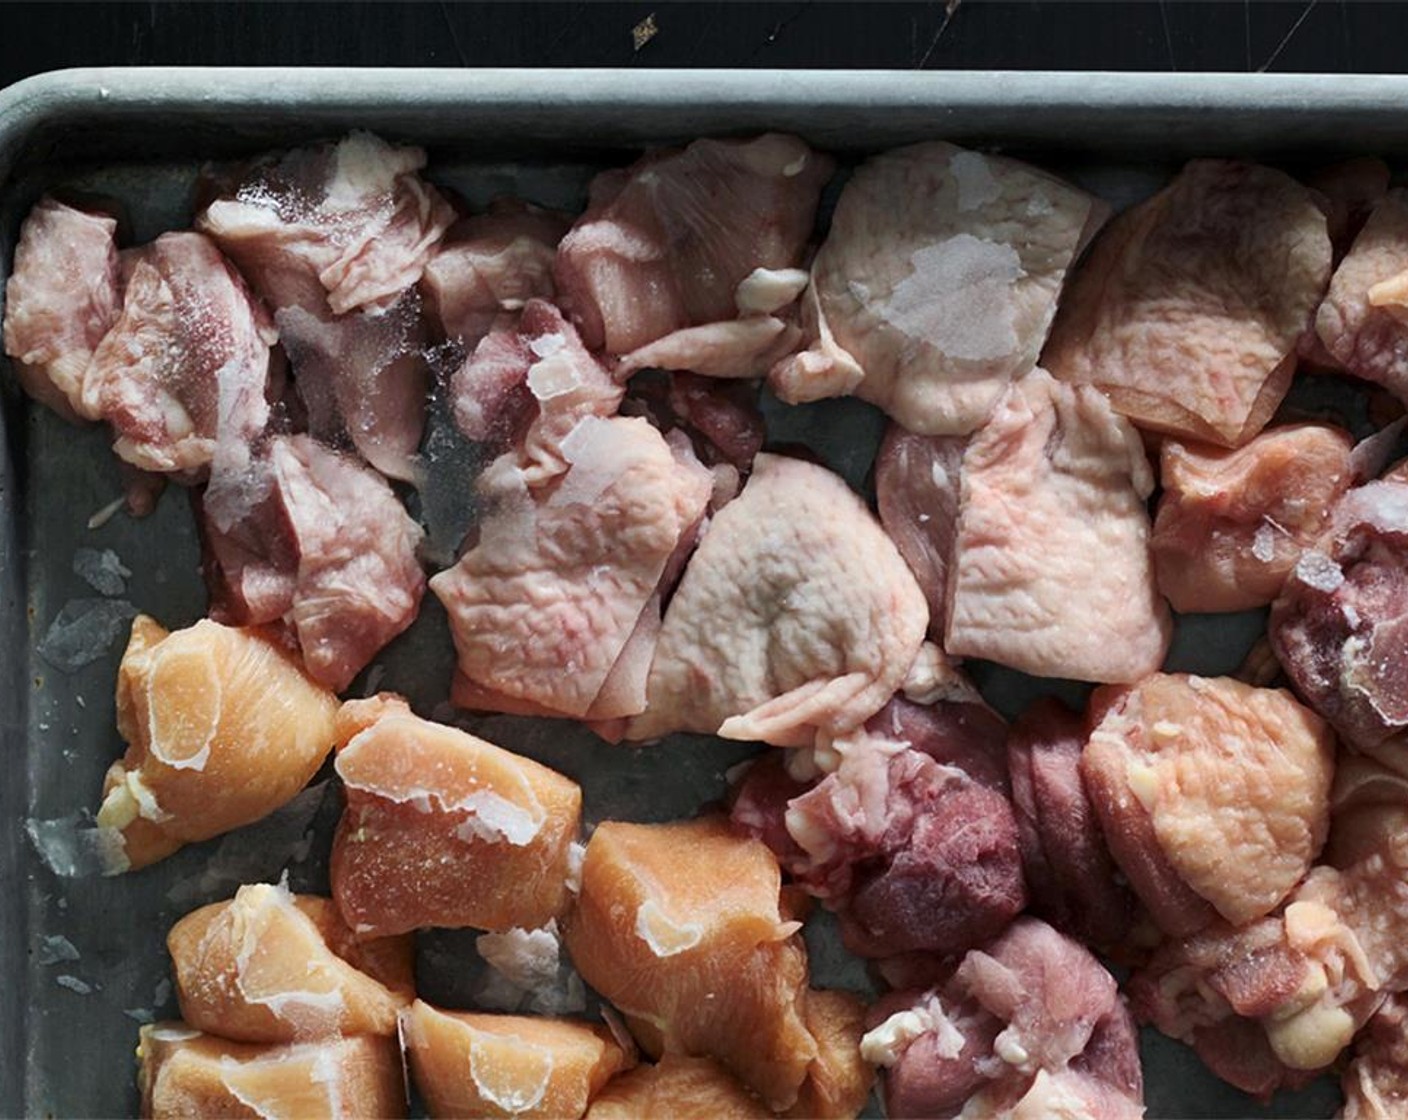 step 1 Cut the Skin-On Chicken Thighs (1.8 lb) and Skinless Chicken Breasts (10.5 oz) into chunks. Spread the skin-on chicken thighs and chicken breast on a sheet in a single layer. Flash-freeze for 2 hours until the skins completely harden.